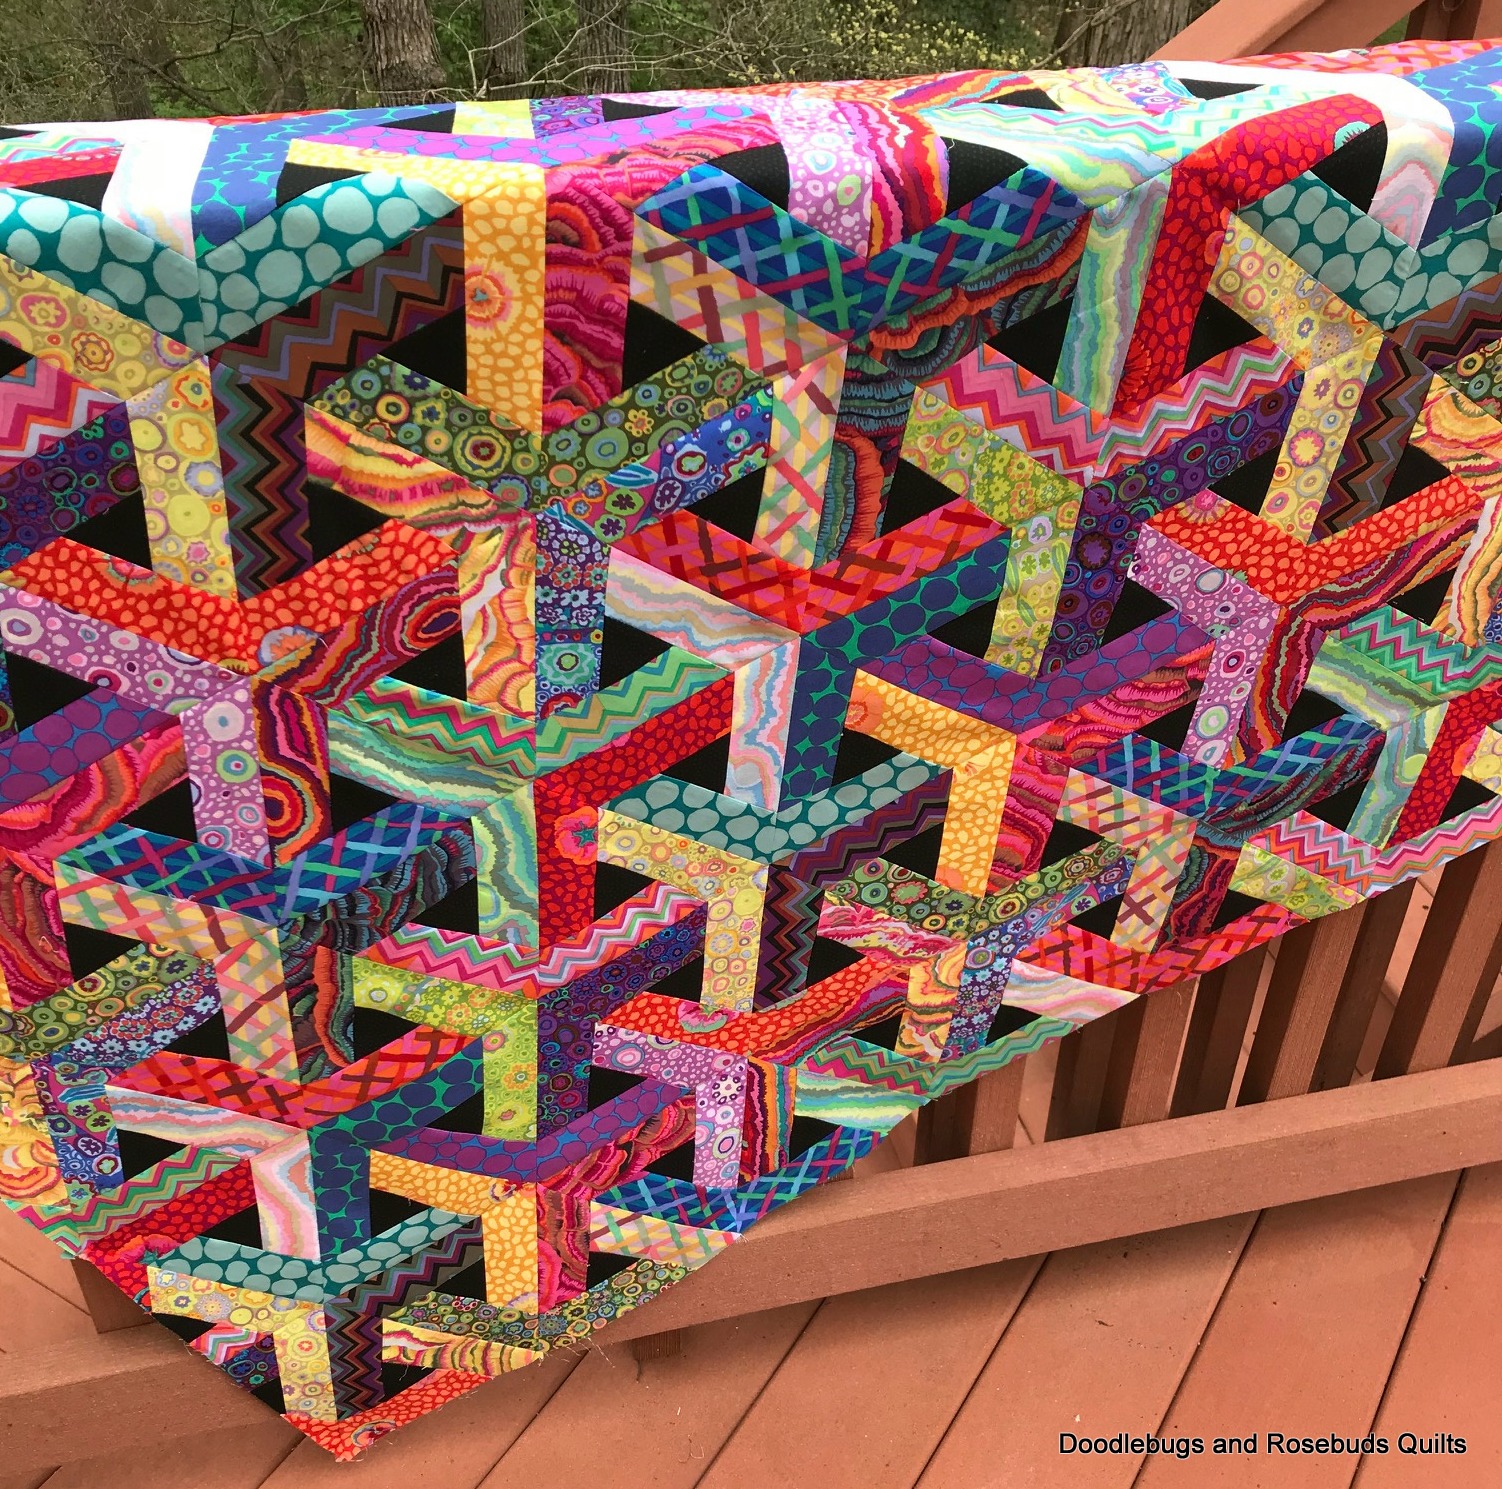 Doodlebugs and Rosebuds Quilts: Finished Escher Top